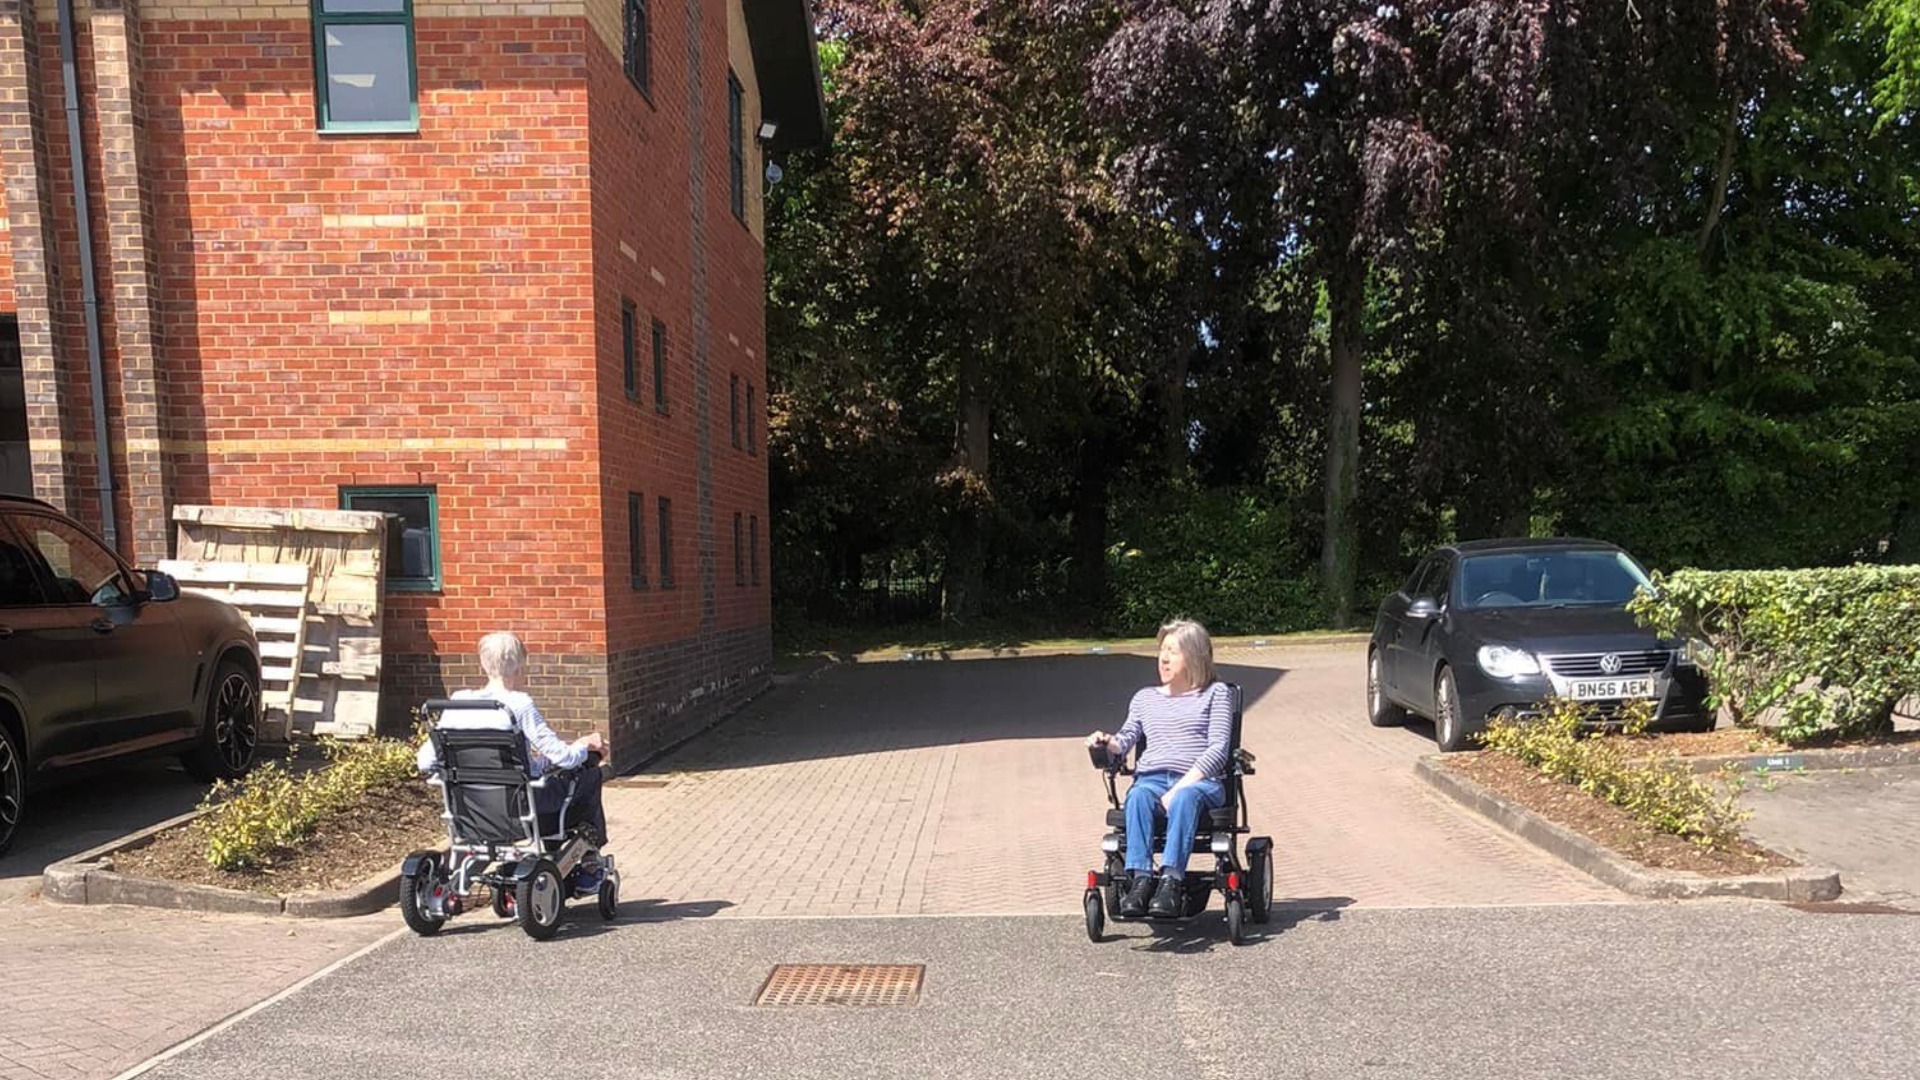 Lith tech wheelchairs being used safely